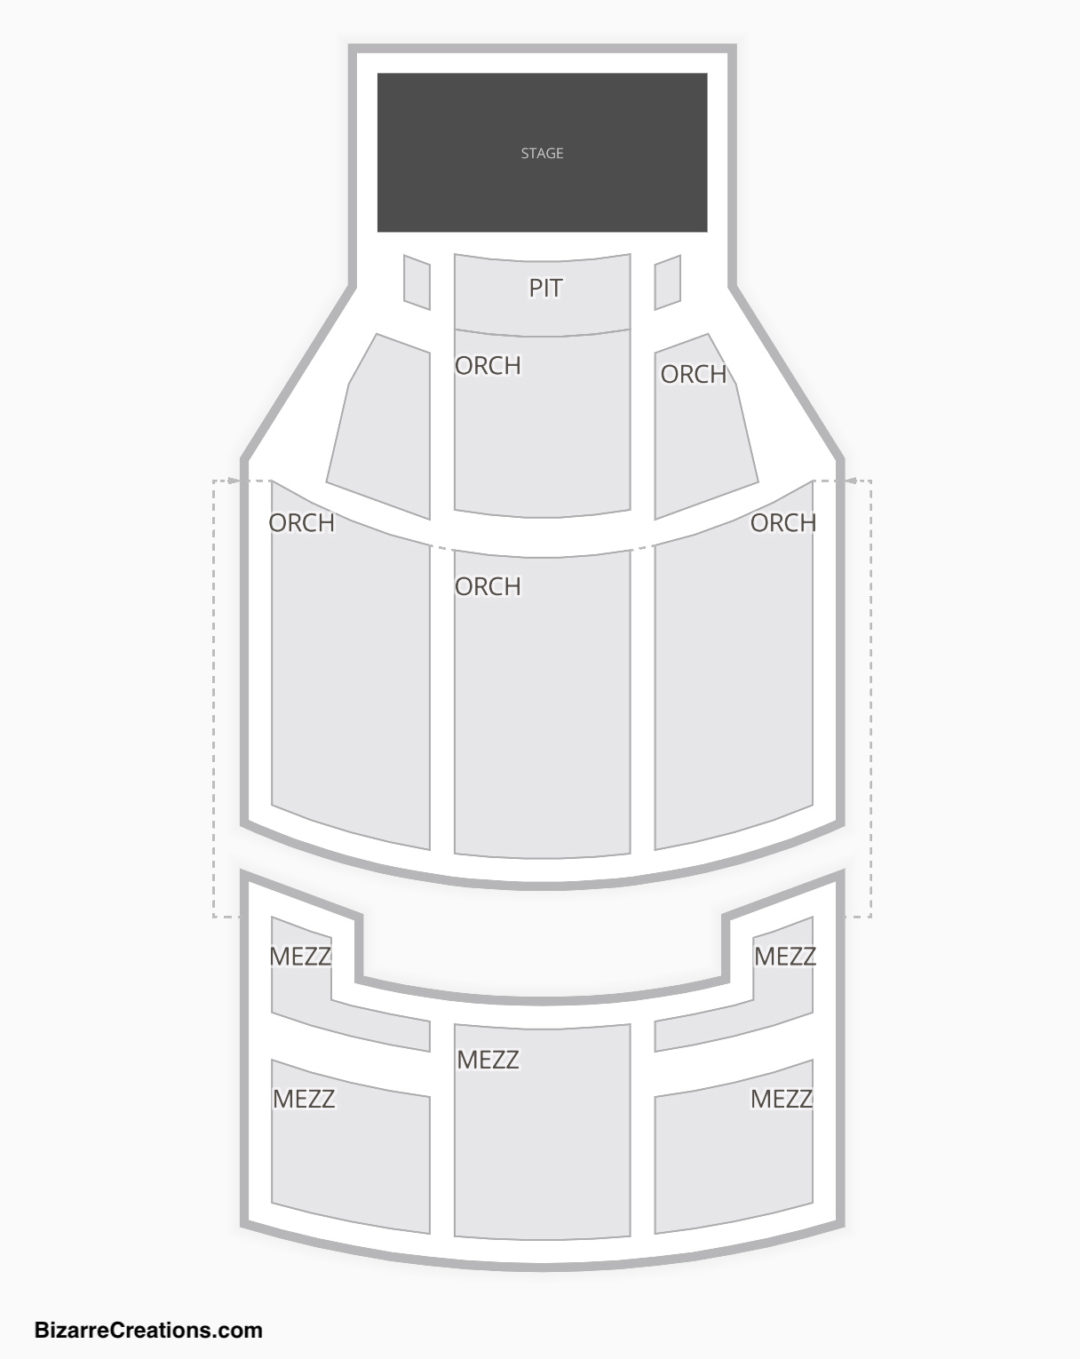 the fillmore miami beach seating chart | seating charts